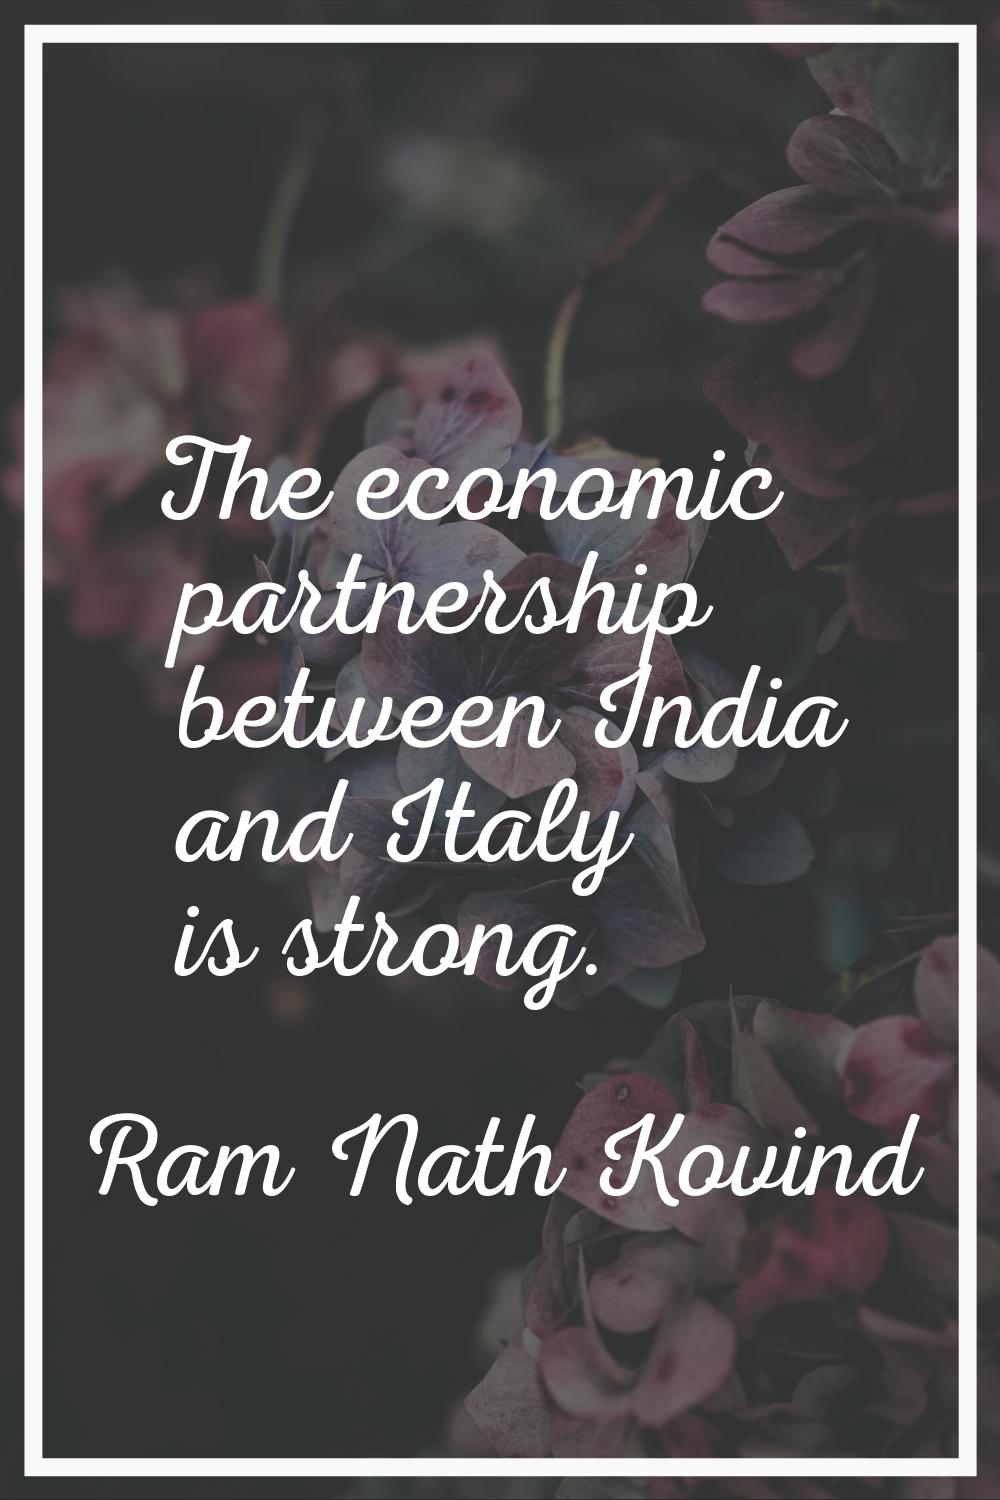 The economic partnership between India and Italy is strong.